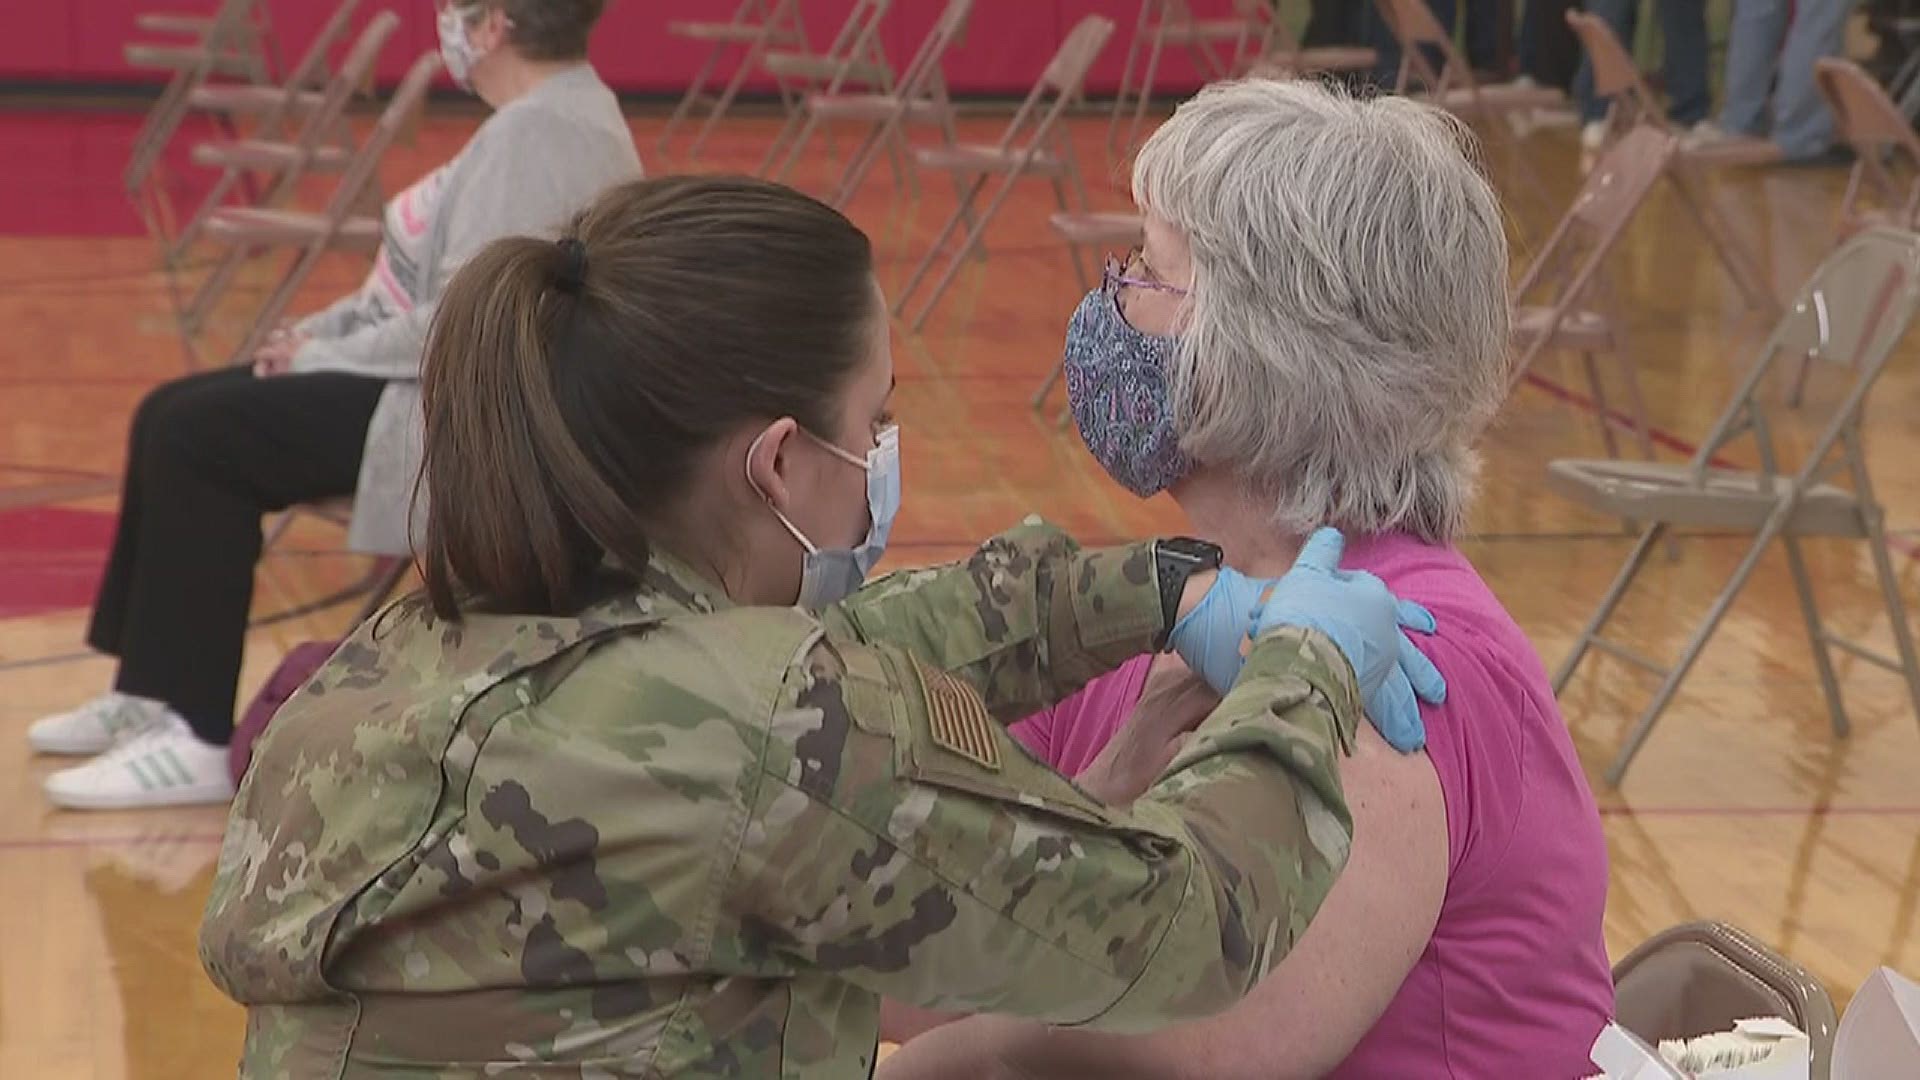 It's the first of several northwestern Illinois counties to receive "Rapid Response Teams" from the National Guard, to help curb rising positive case numbers.